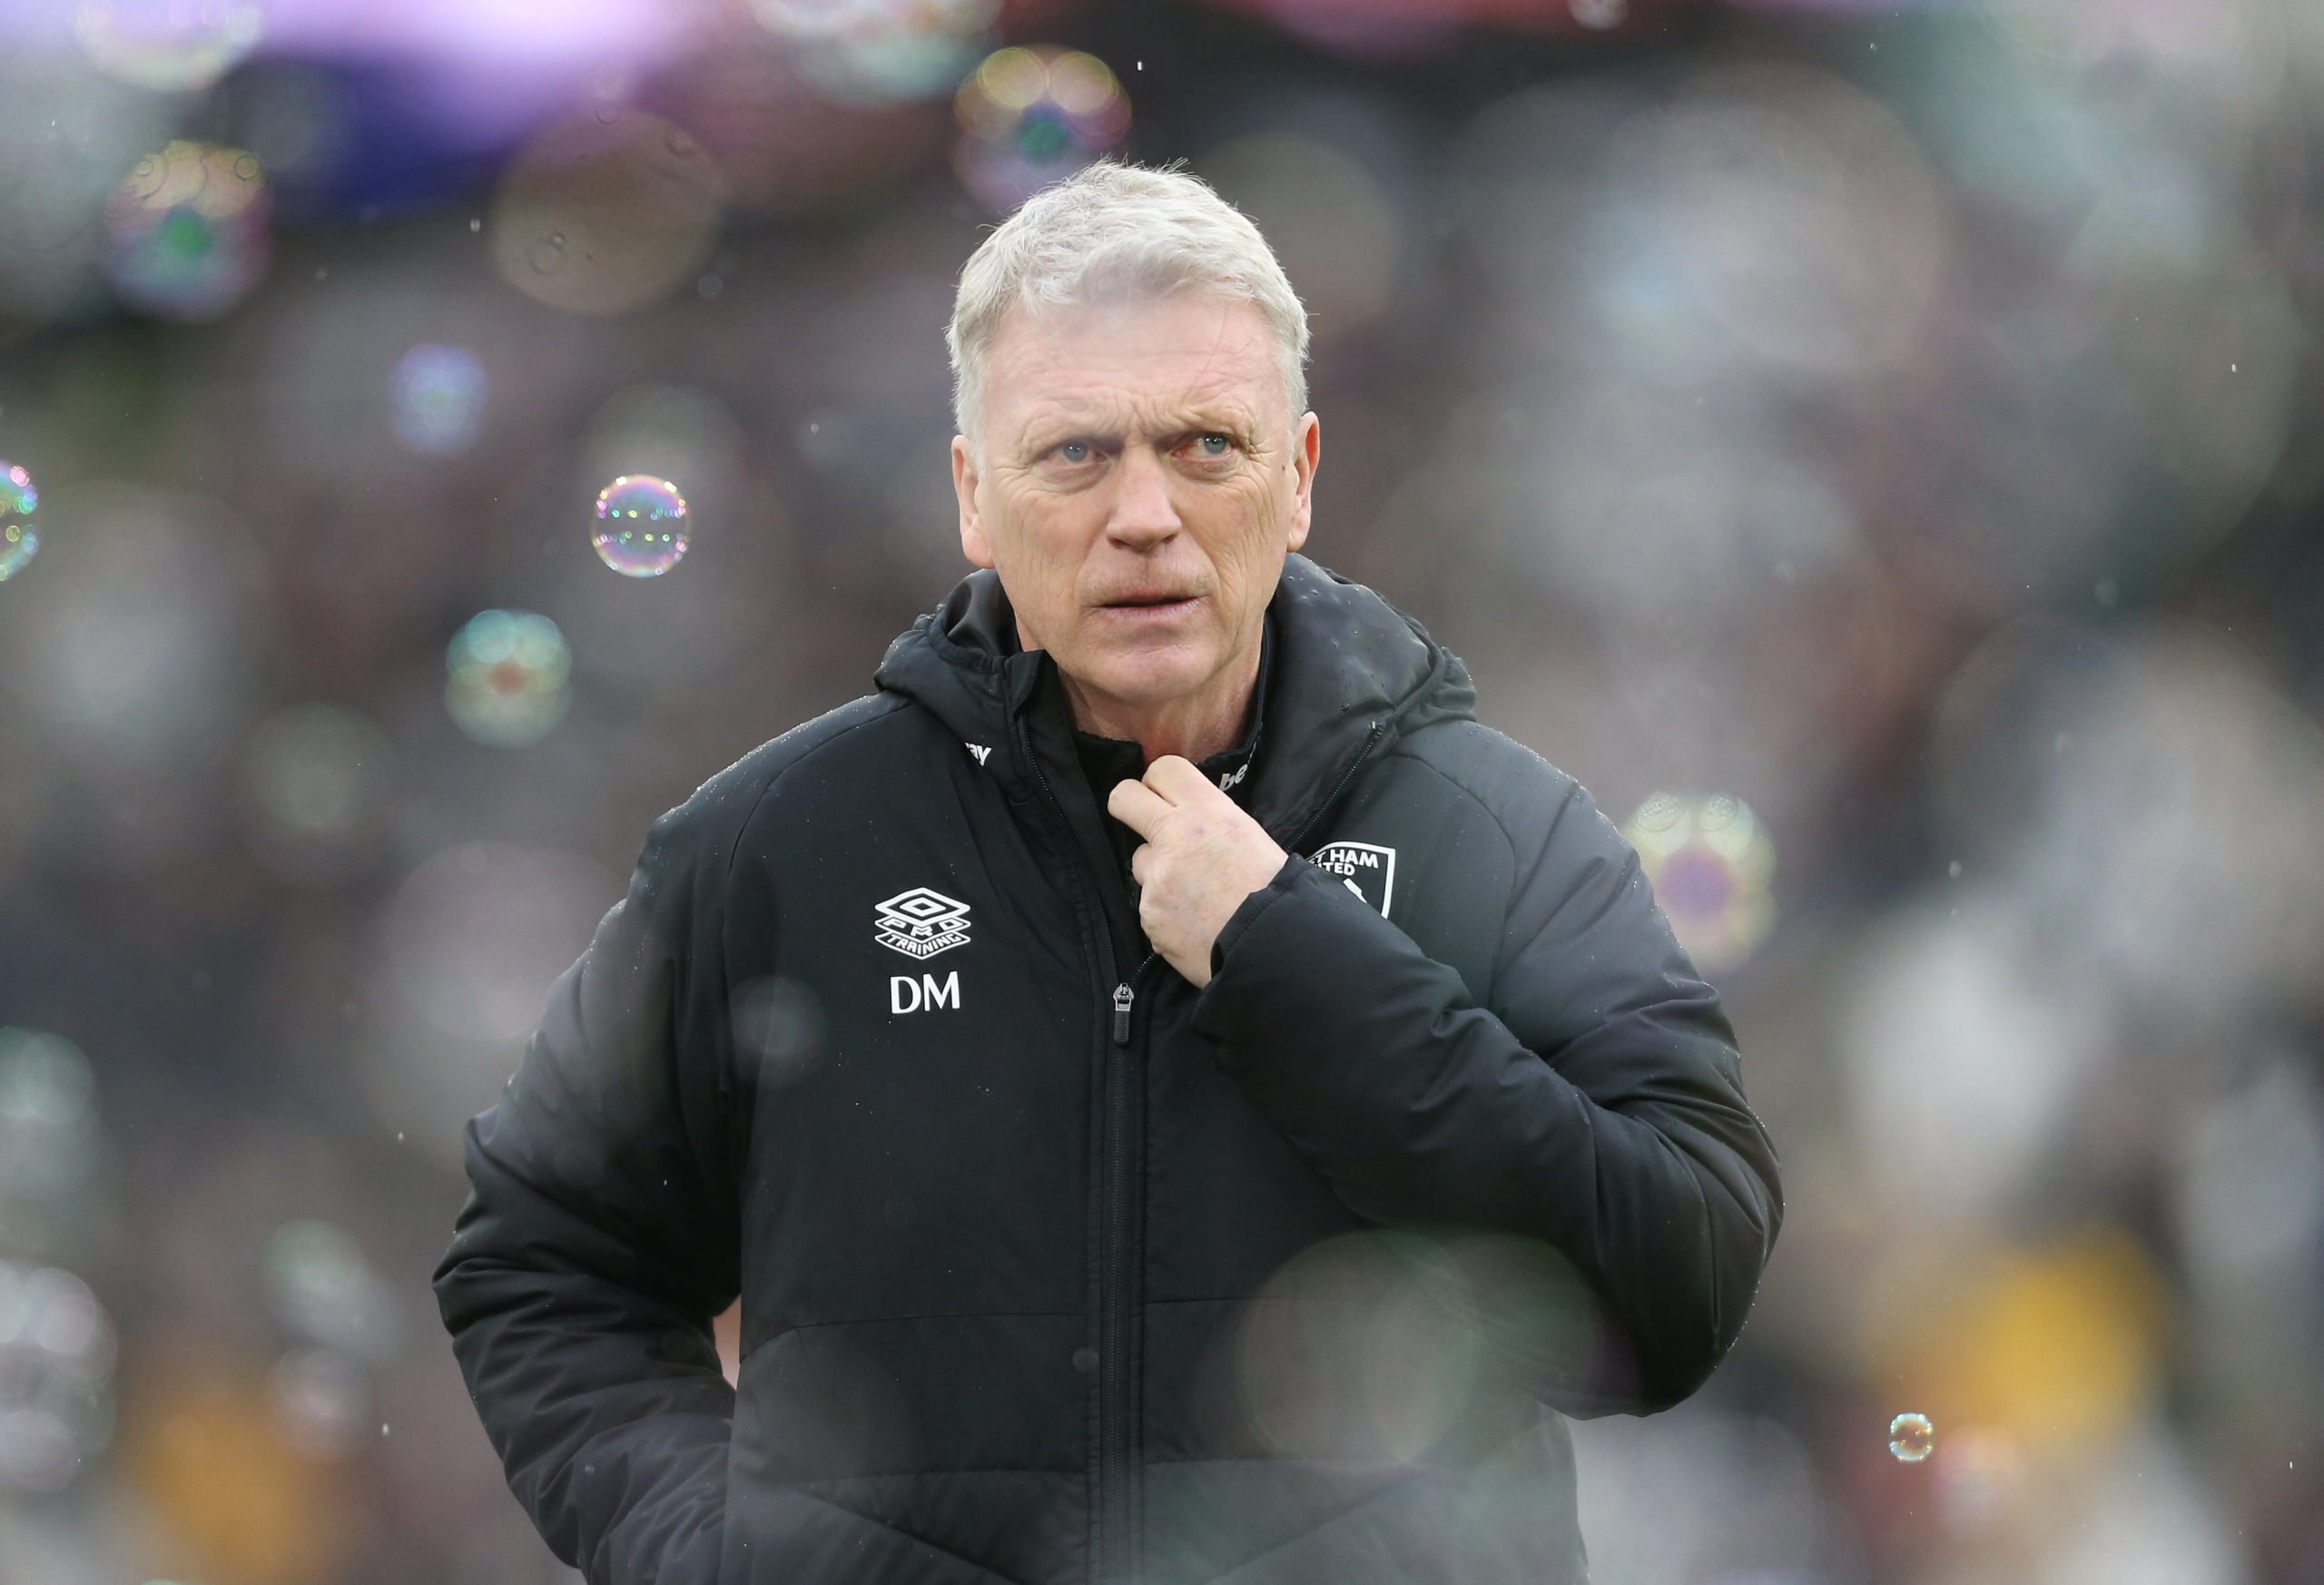 West Ham boss David Moyes needs to be ruthless and sell Tomas Soucek in the summer